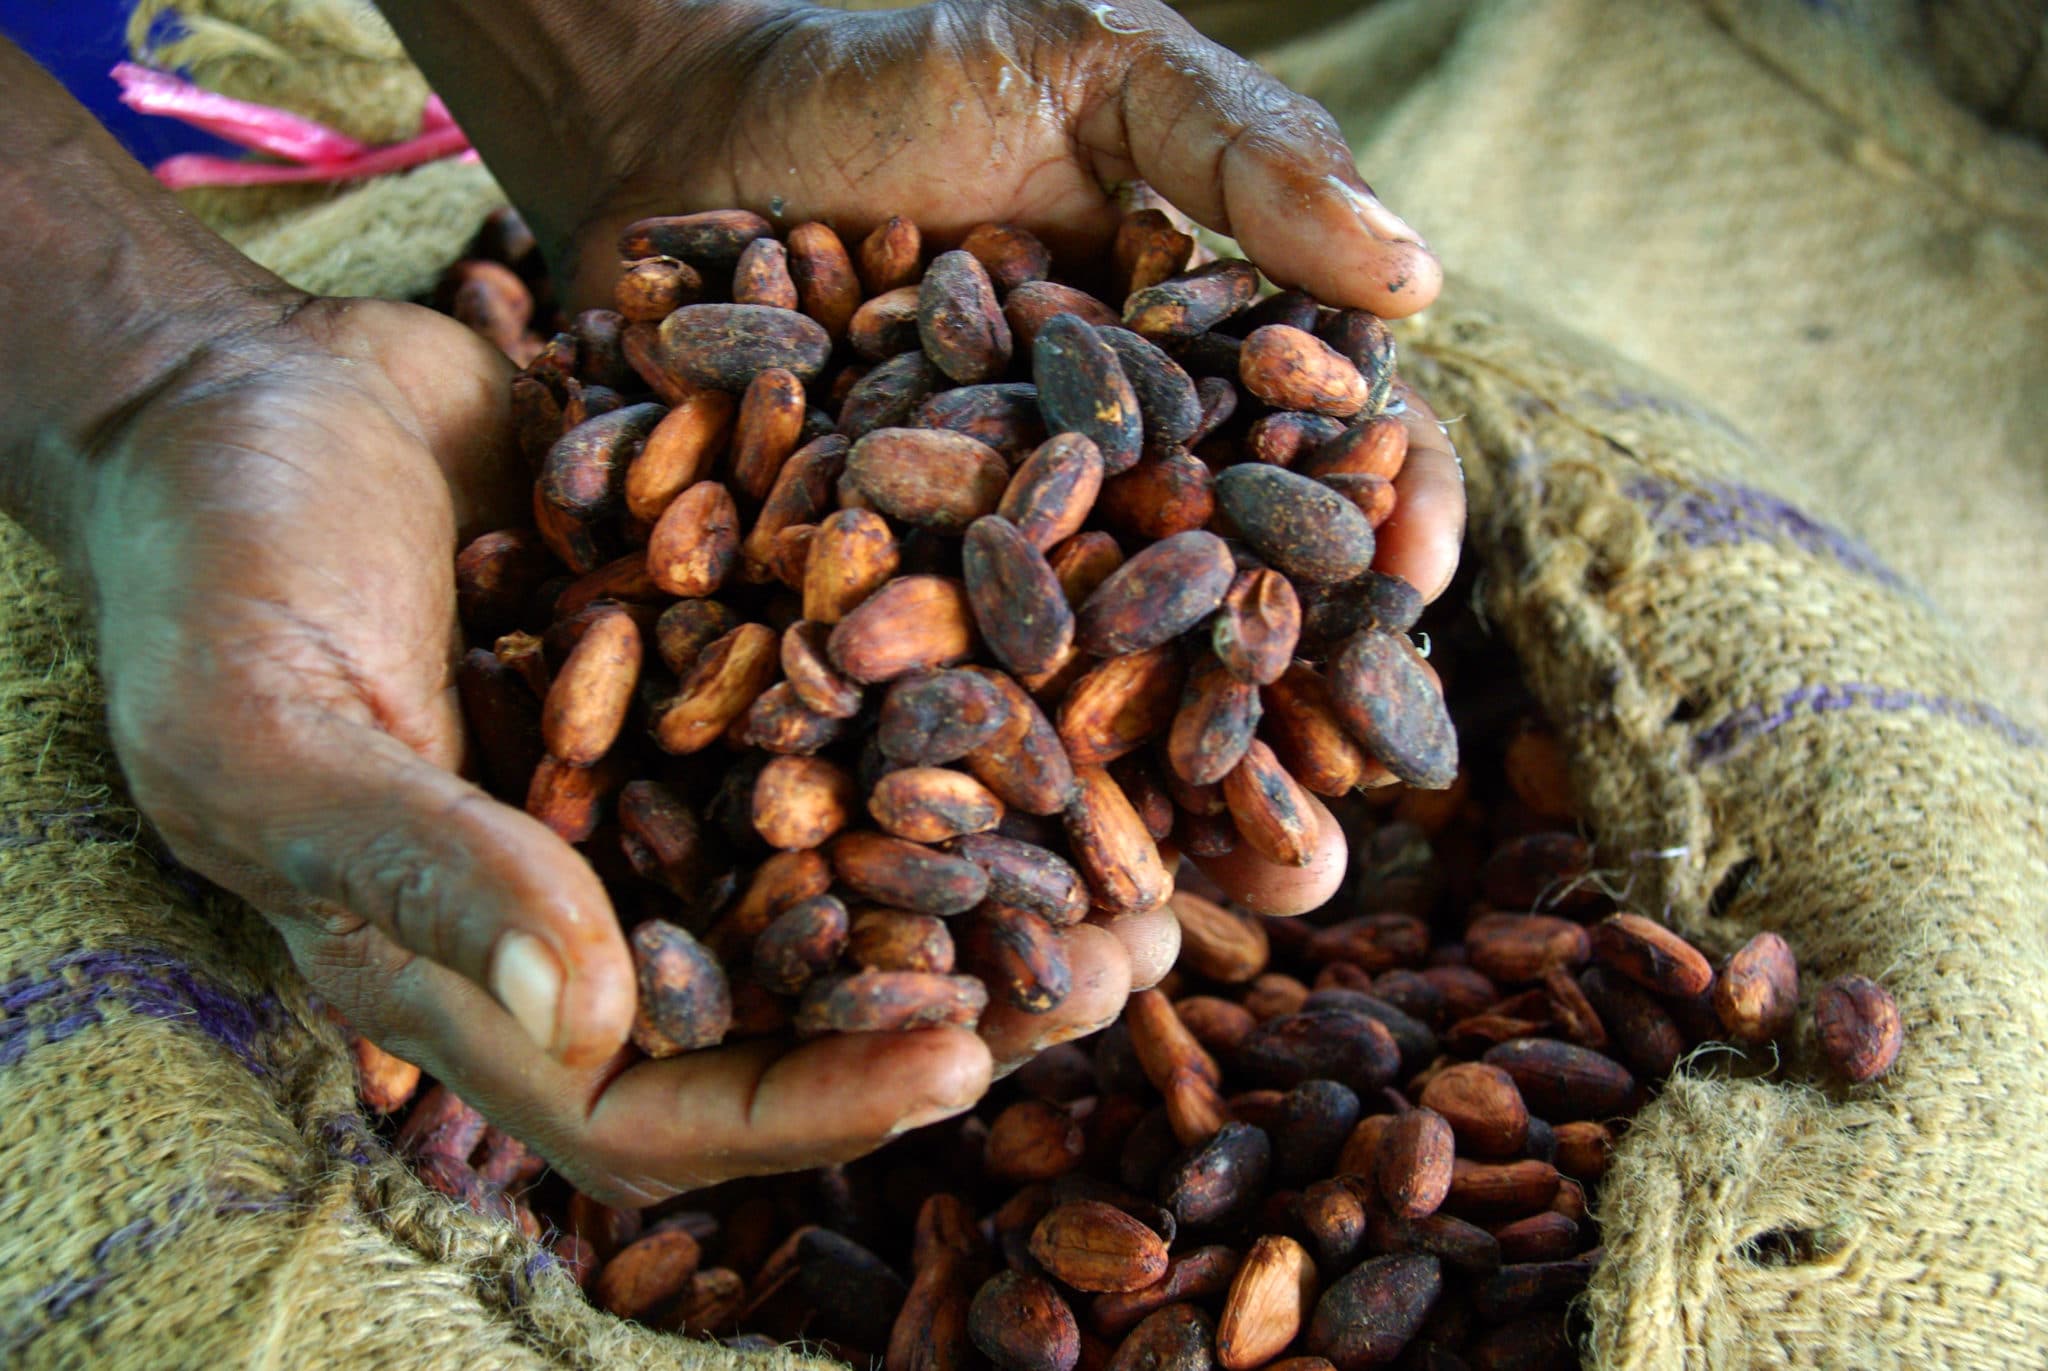 Pact to aid poor cocoa farmers in peril as COVID-19 hits demand